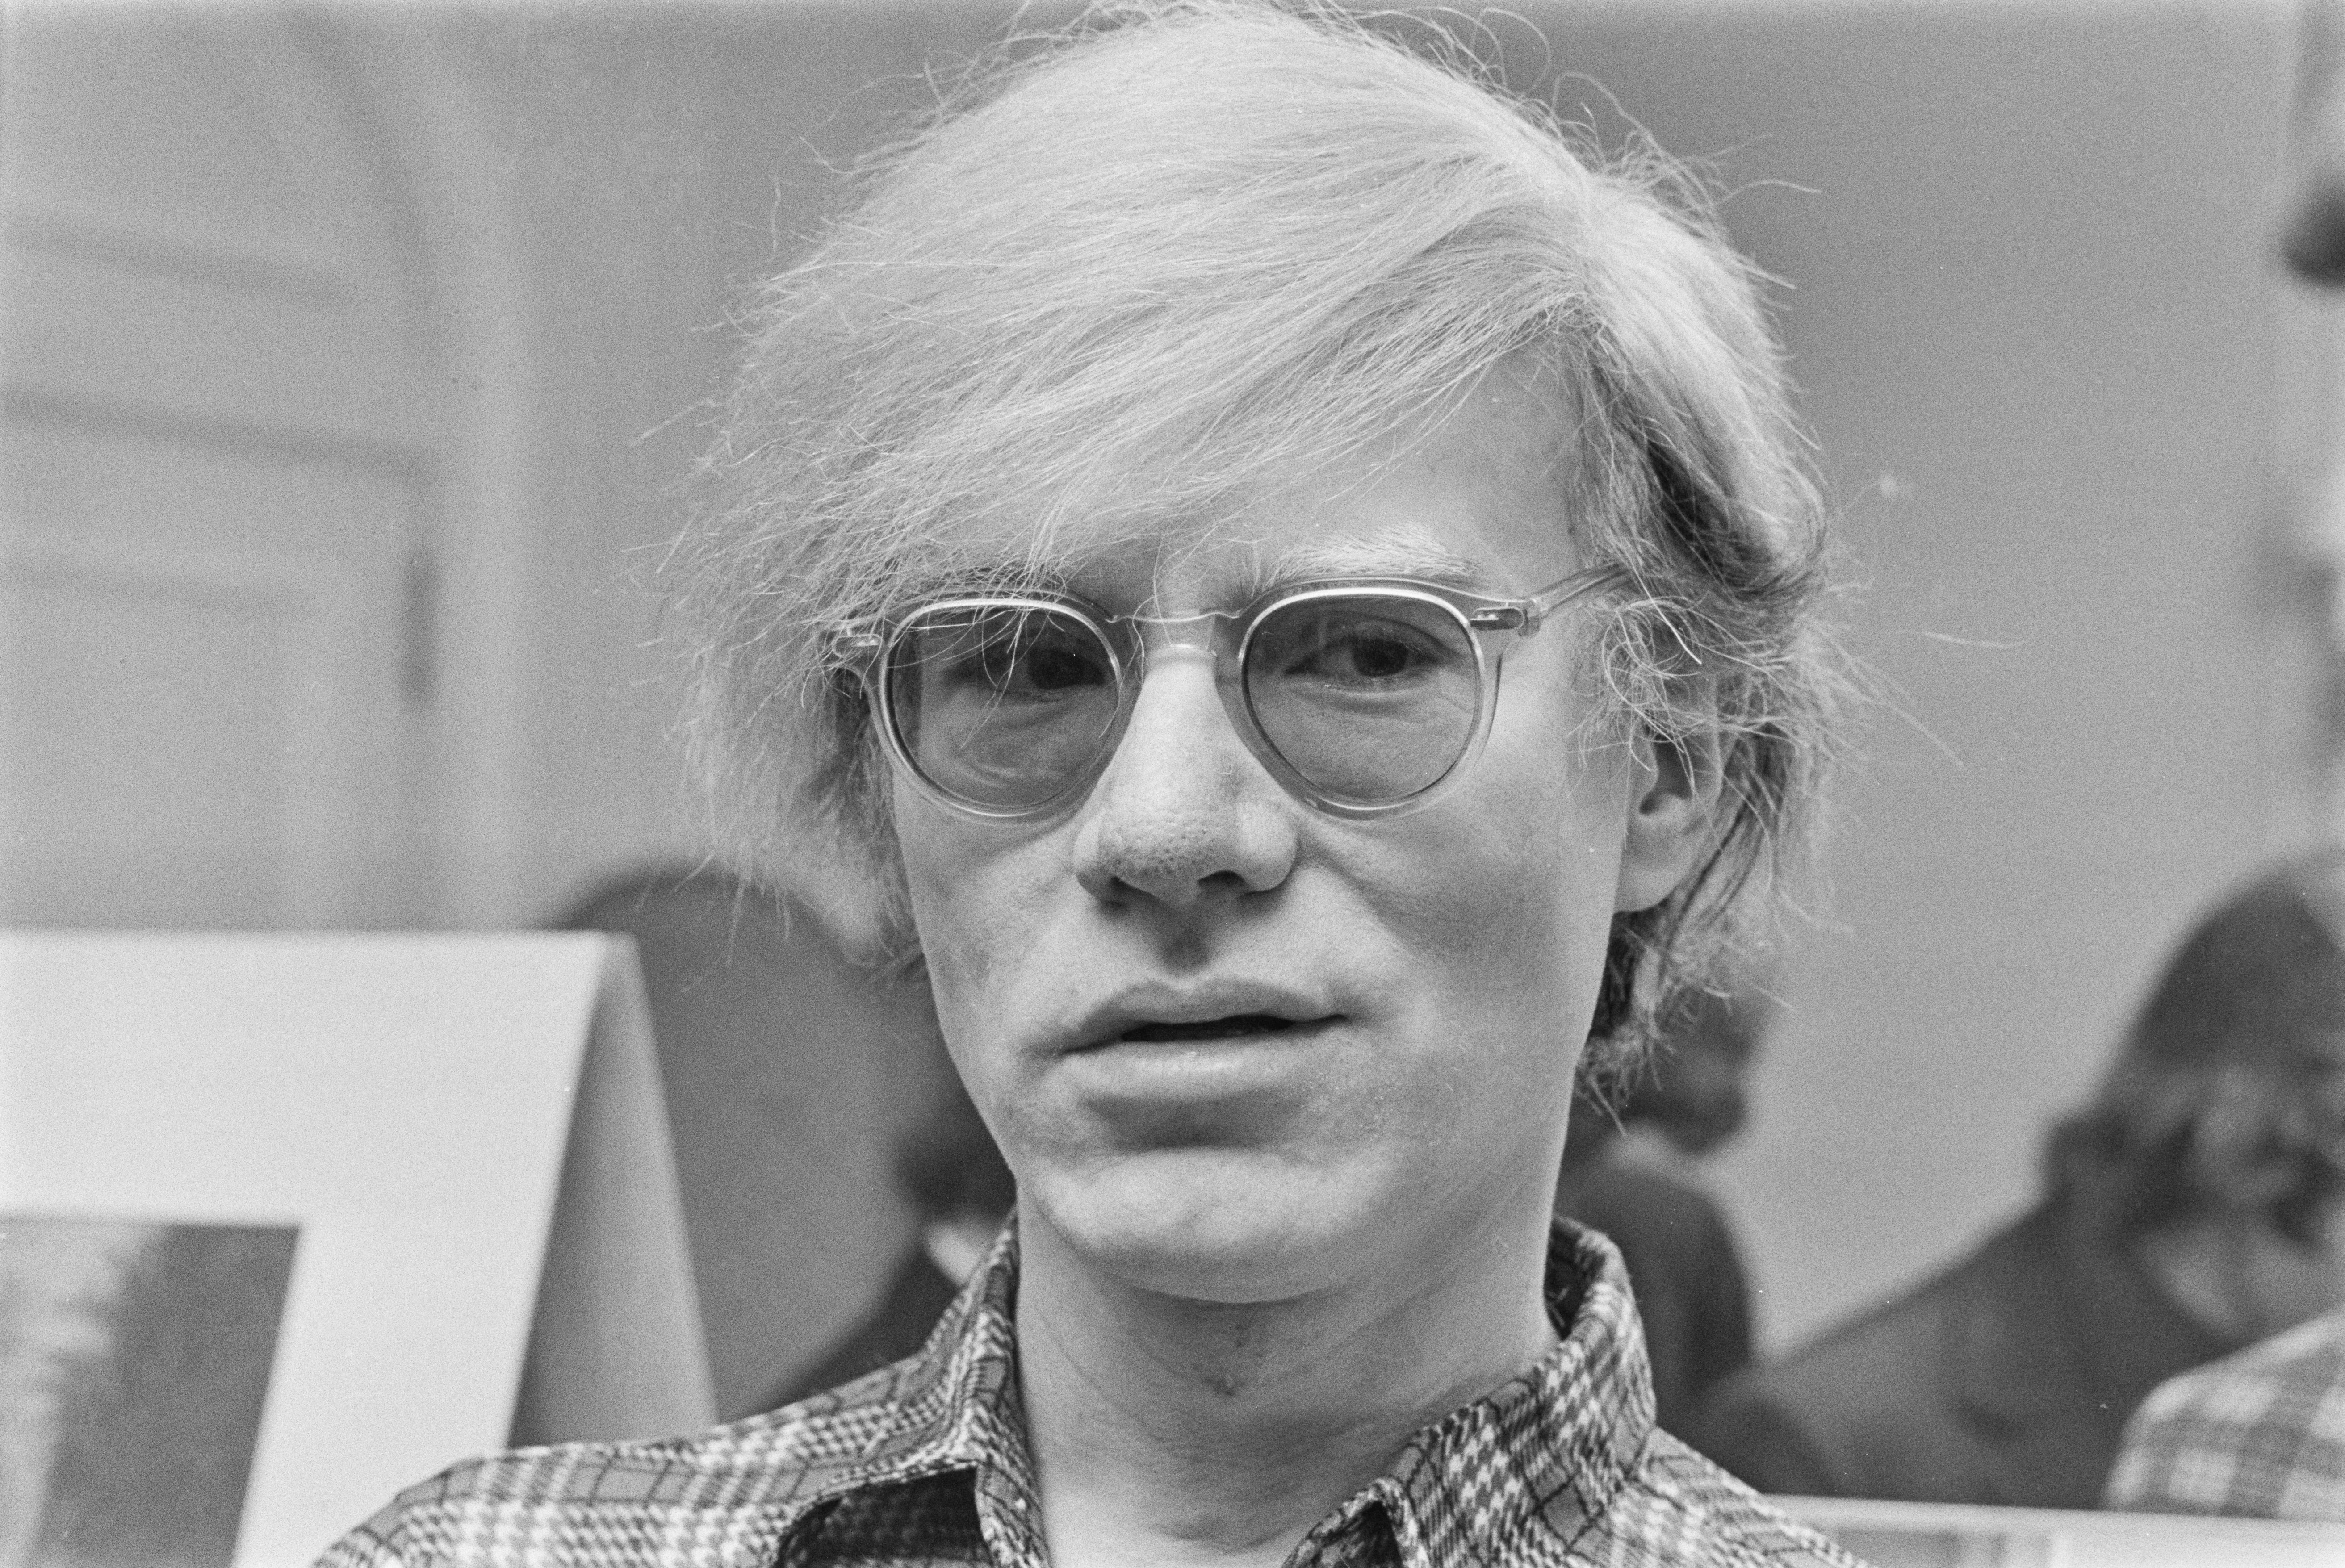 The exhibition is a comprehensive overview of Warhol’s creative life